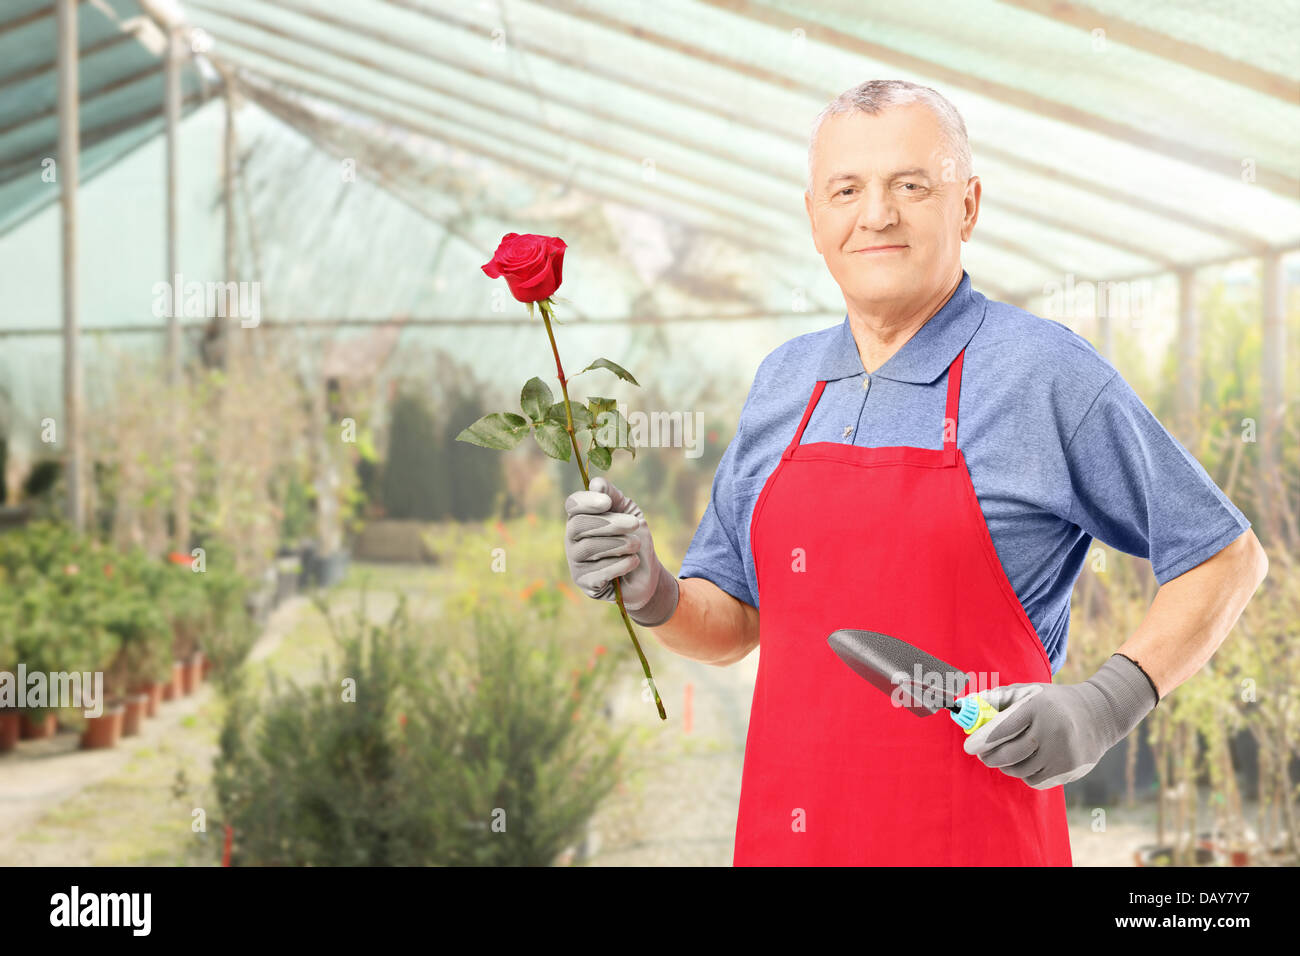 Male gardener holding a rose flower and gardening equipment, in a hothouse Stock Photo